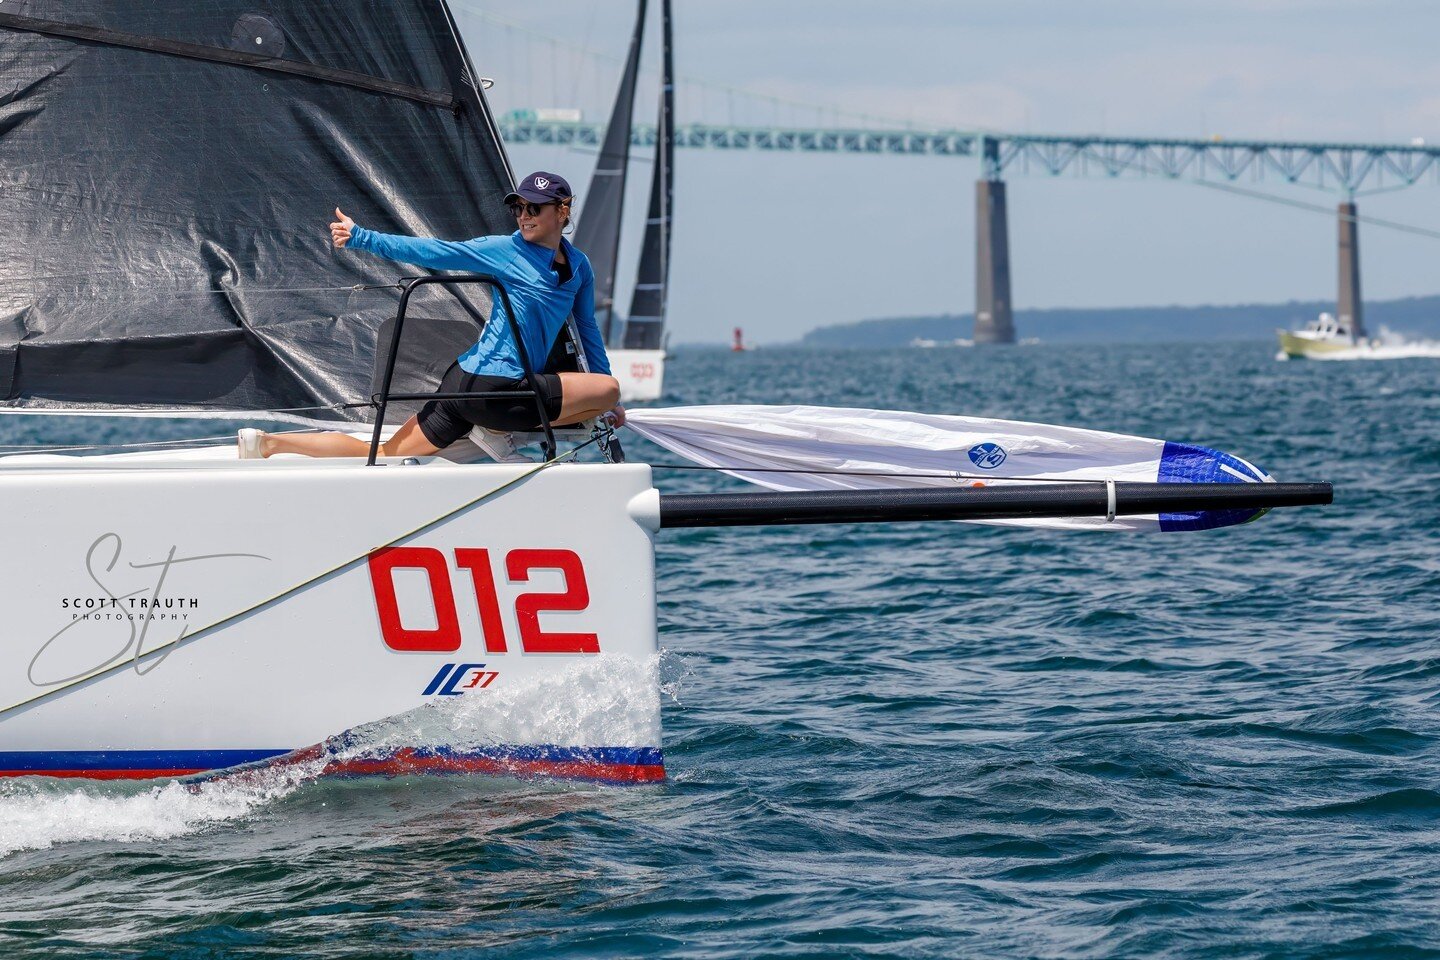 #frontendfriday 
Tomorrow starts the Newport Regatta hosted by @sailnewportri 
Here are two shots from last year's regatta and one from a new competitor in the #ic37class.
Photo descriptions in comments. More photos from 2022 at  https://buff.ly/3D3w